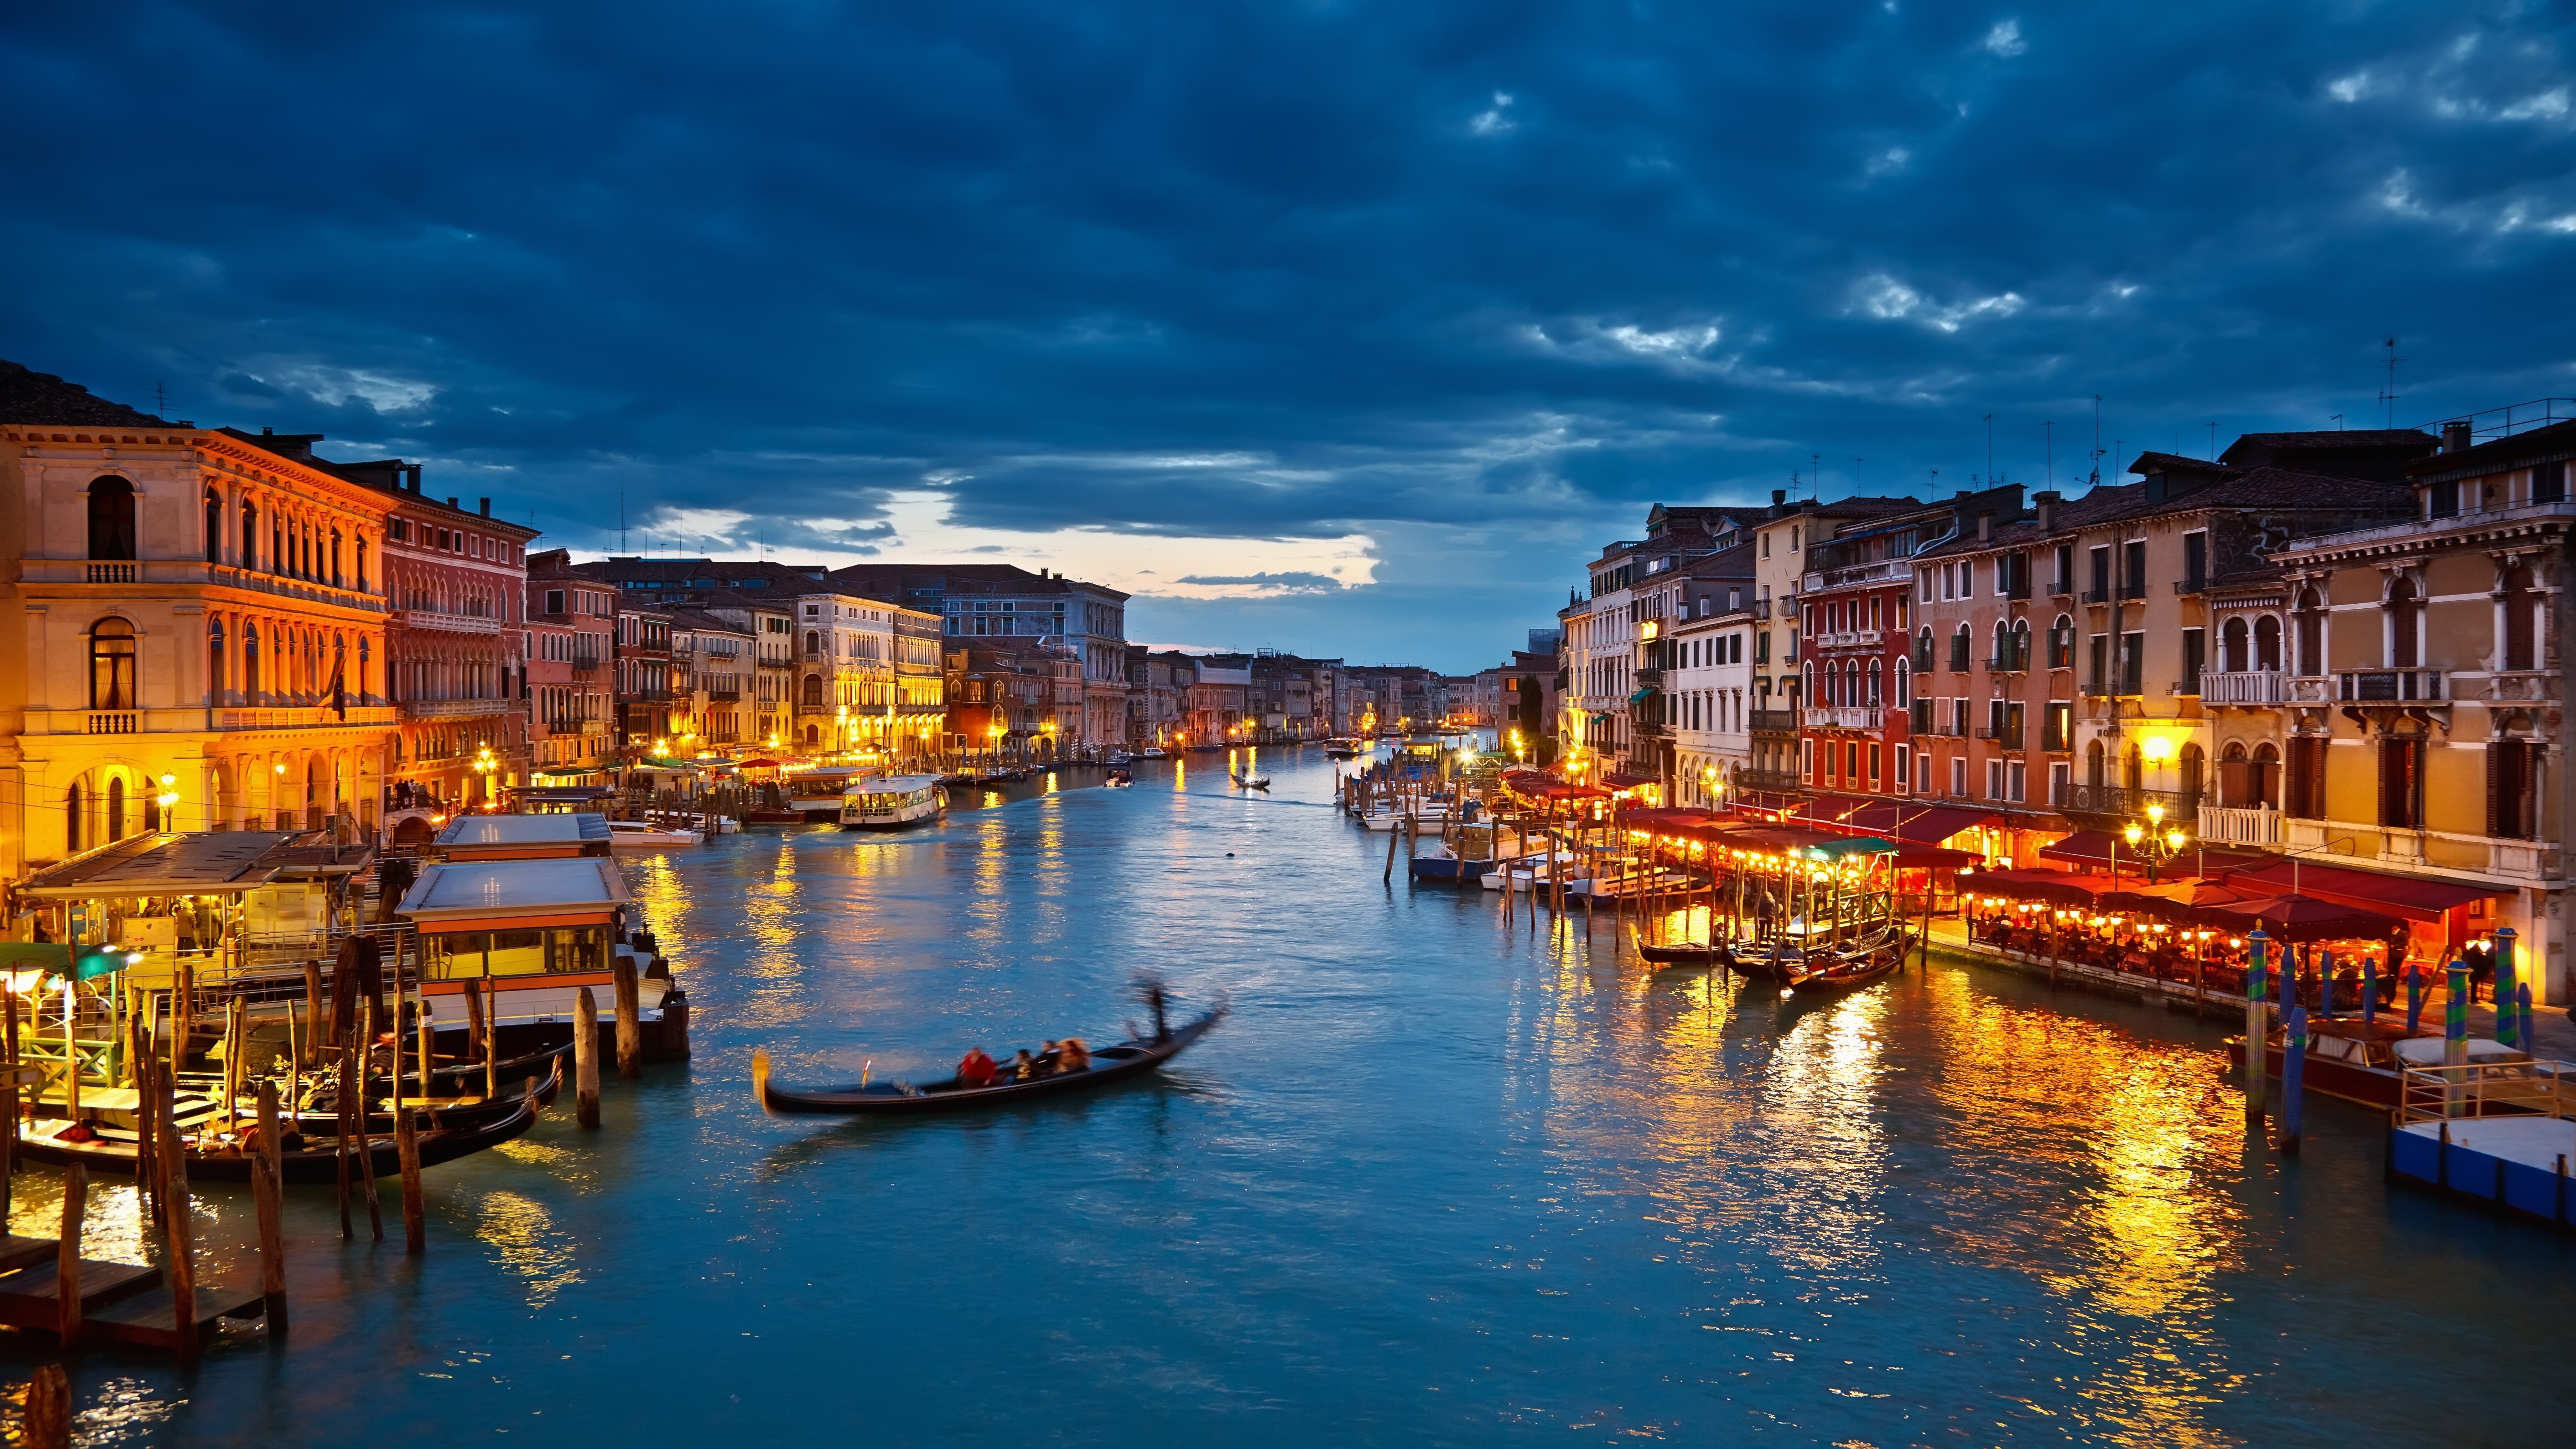 Venice Italy for 5120 x 2880 5K Ultra HD resolution